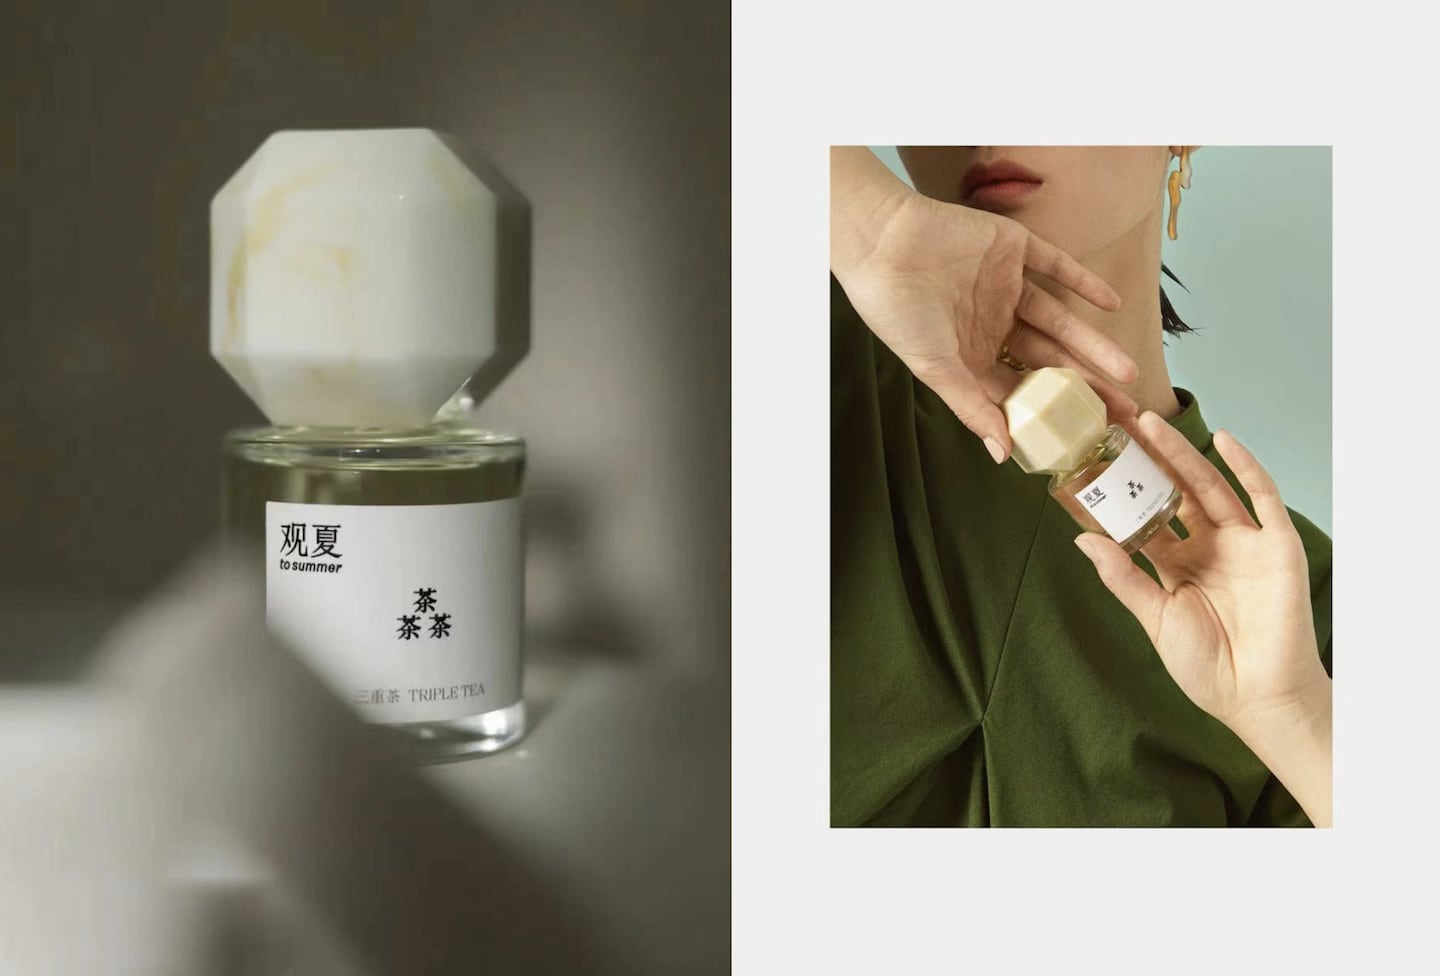 To Summer is a luxury fragrance maker founded in 2018 by Li Shen and Liu Huipu that secured investment from L’Oréal Groupe's China-focused corporate venture fund Shanghai Meicifang Investment Co.